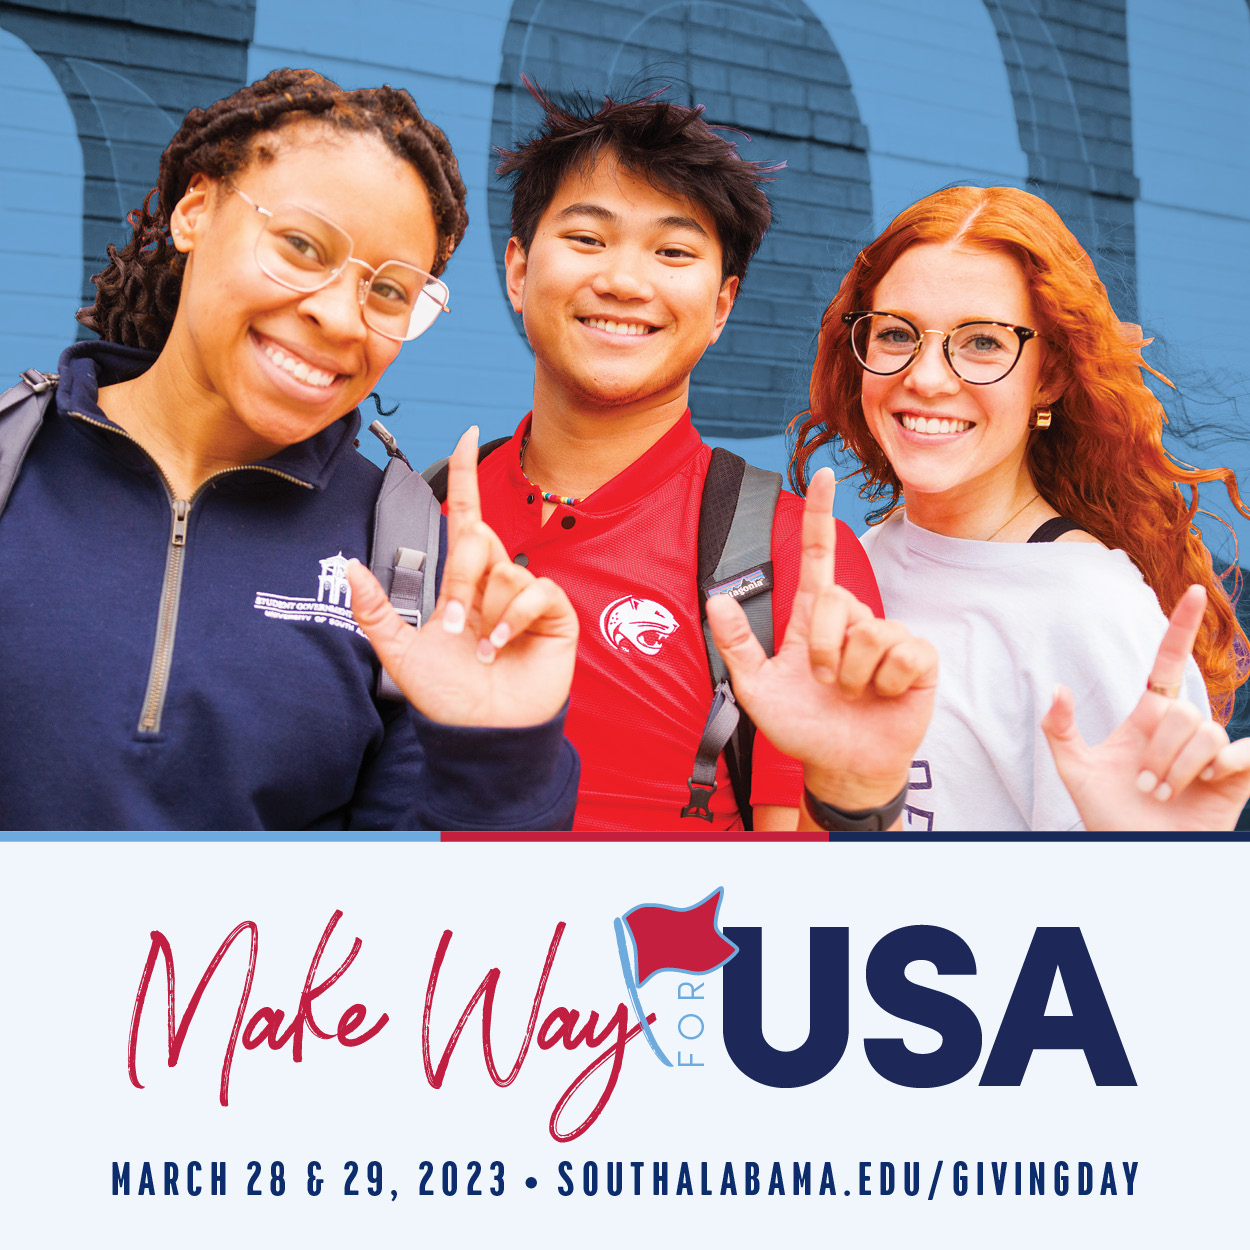 Make Way for USA March 28 and 29, 2023 Southalabama.edu/givingday with image of three students holding up J sign for Jaguars.